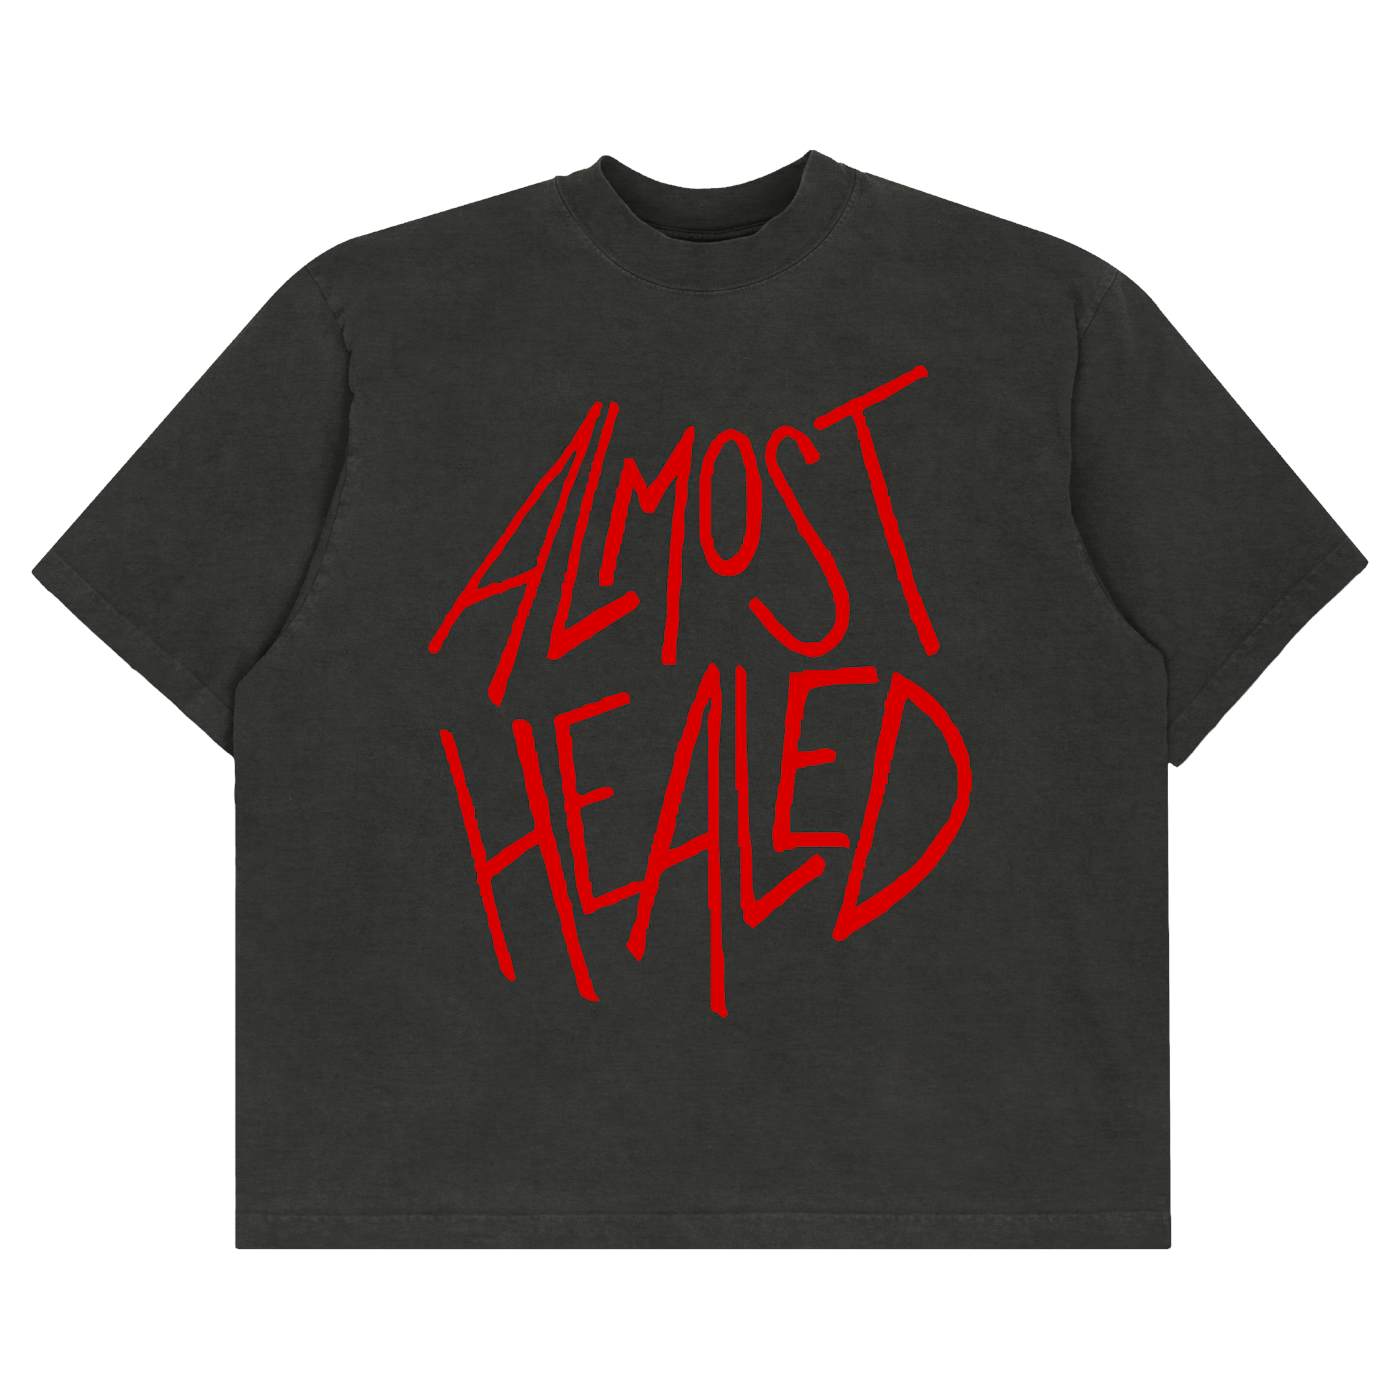 Lil Durk ALMOST HEALED "ALL MY LIFE" T-SHIRT BLACK